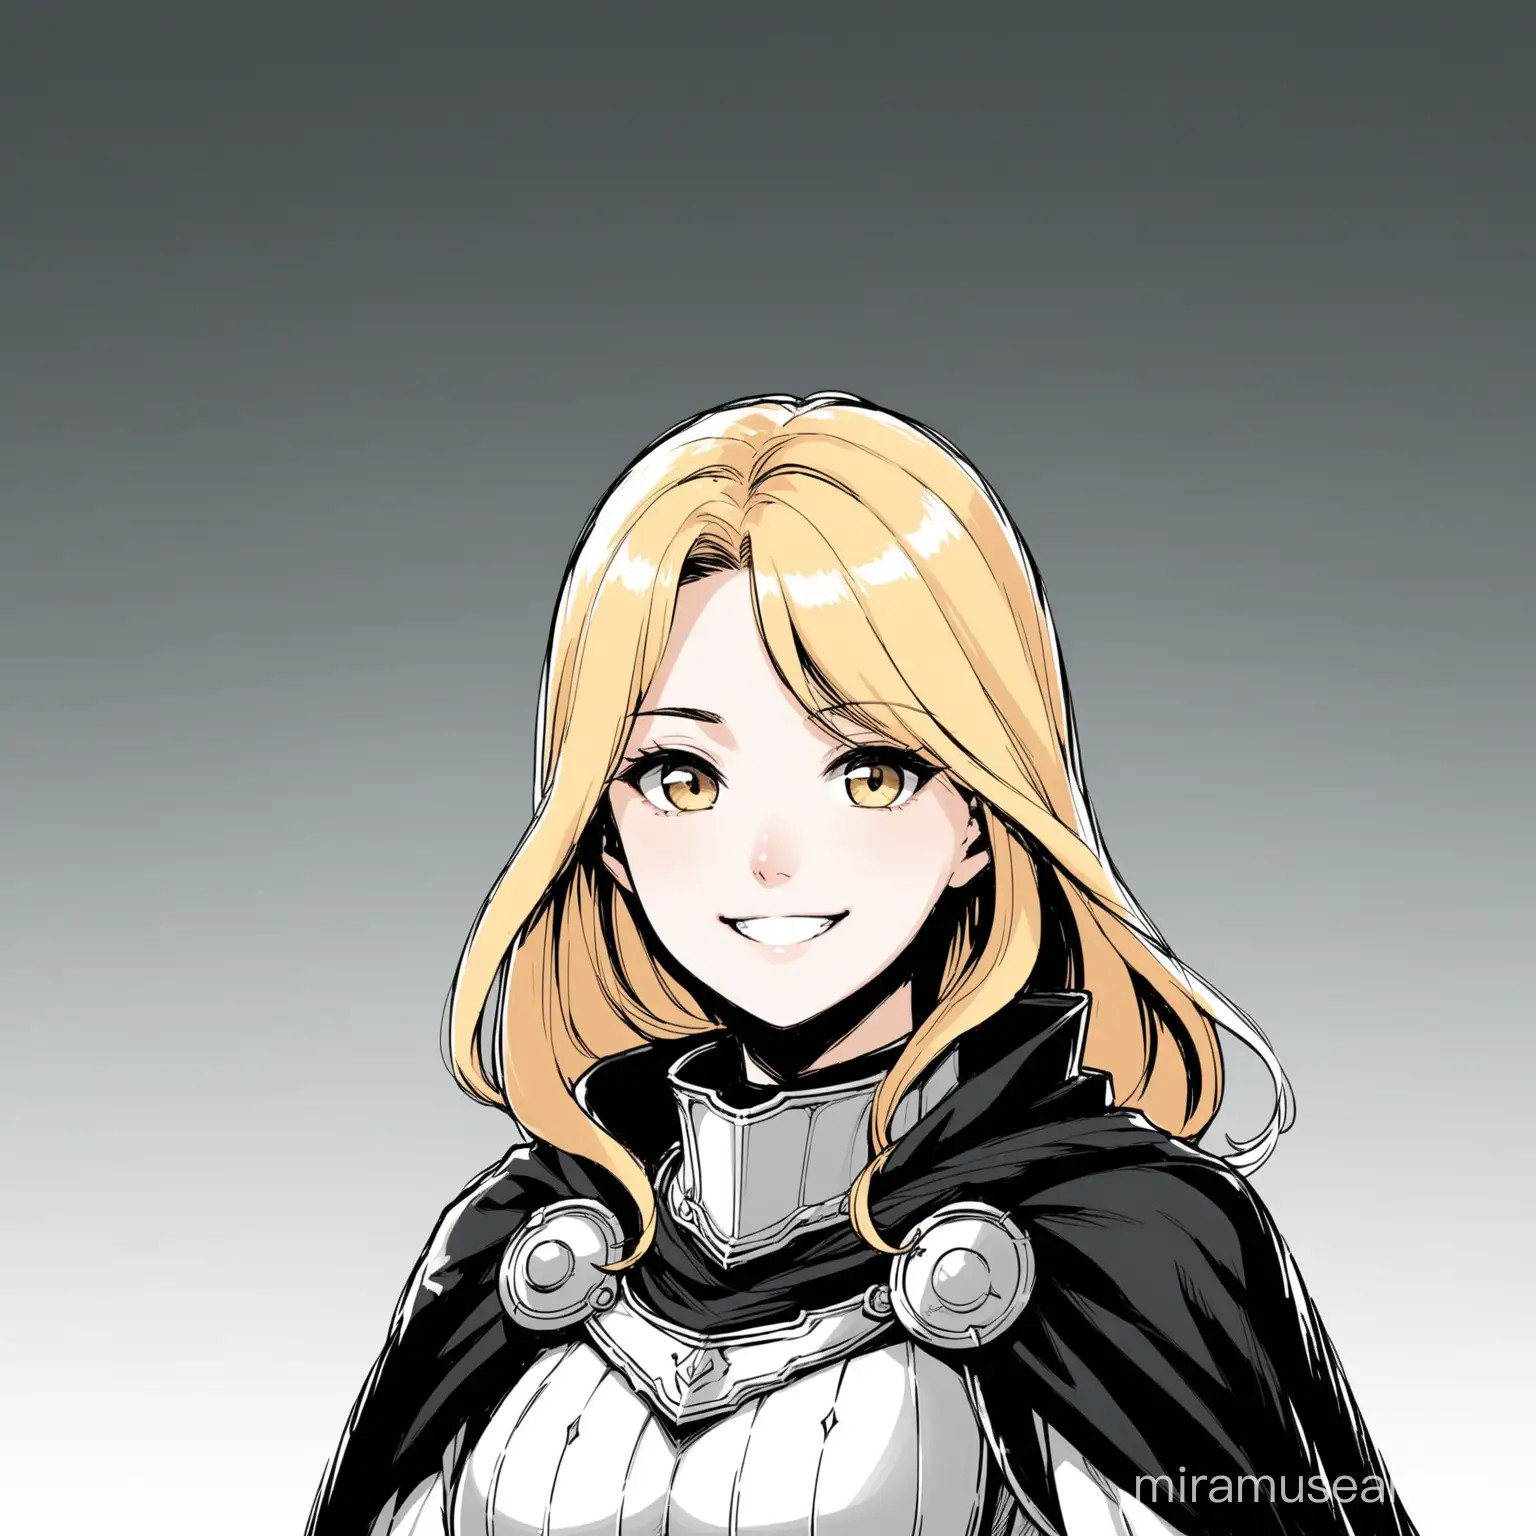 A smiling blonde woman wearing black and white light armor and cape against a black and white background; Korean webtoon style